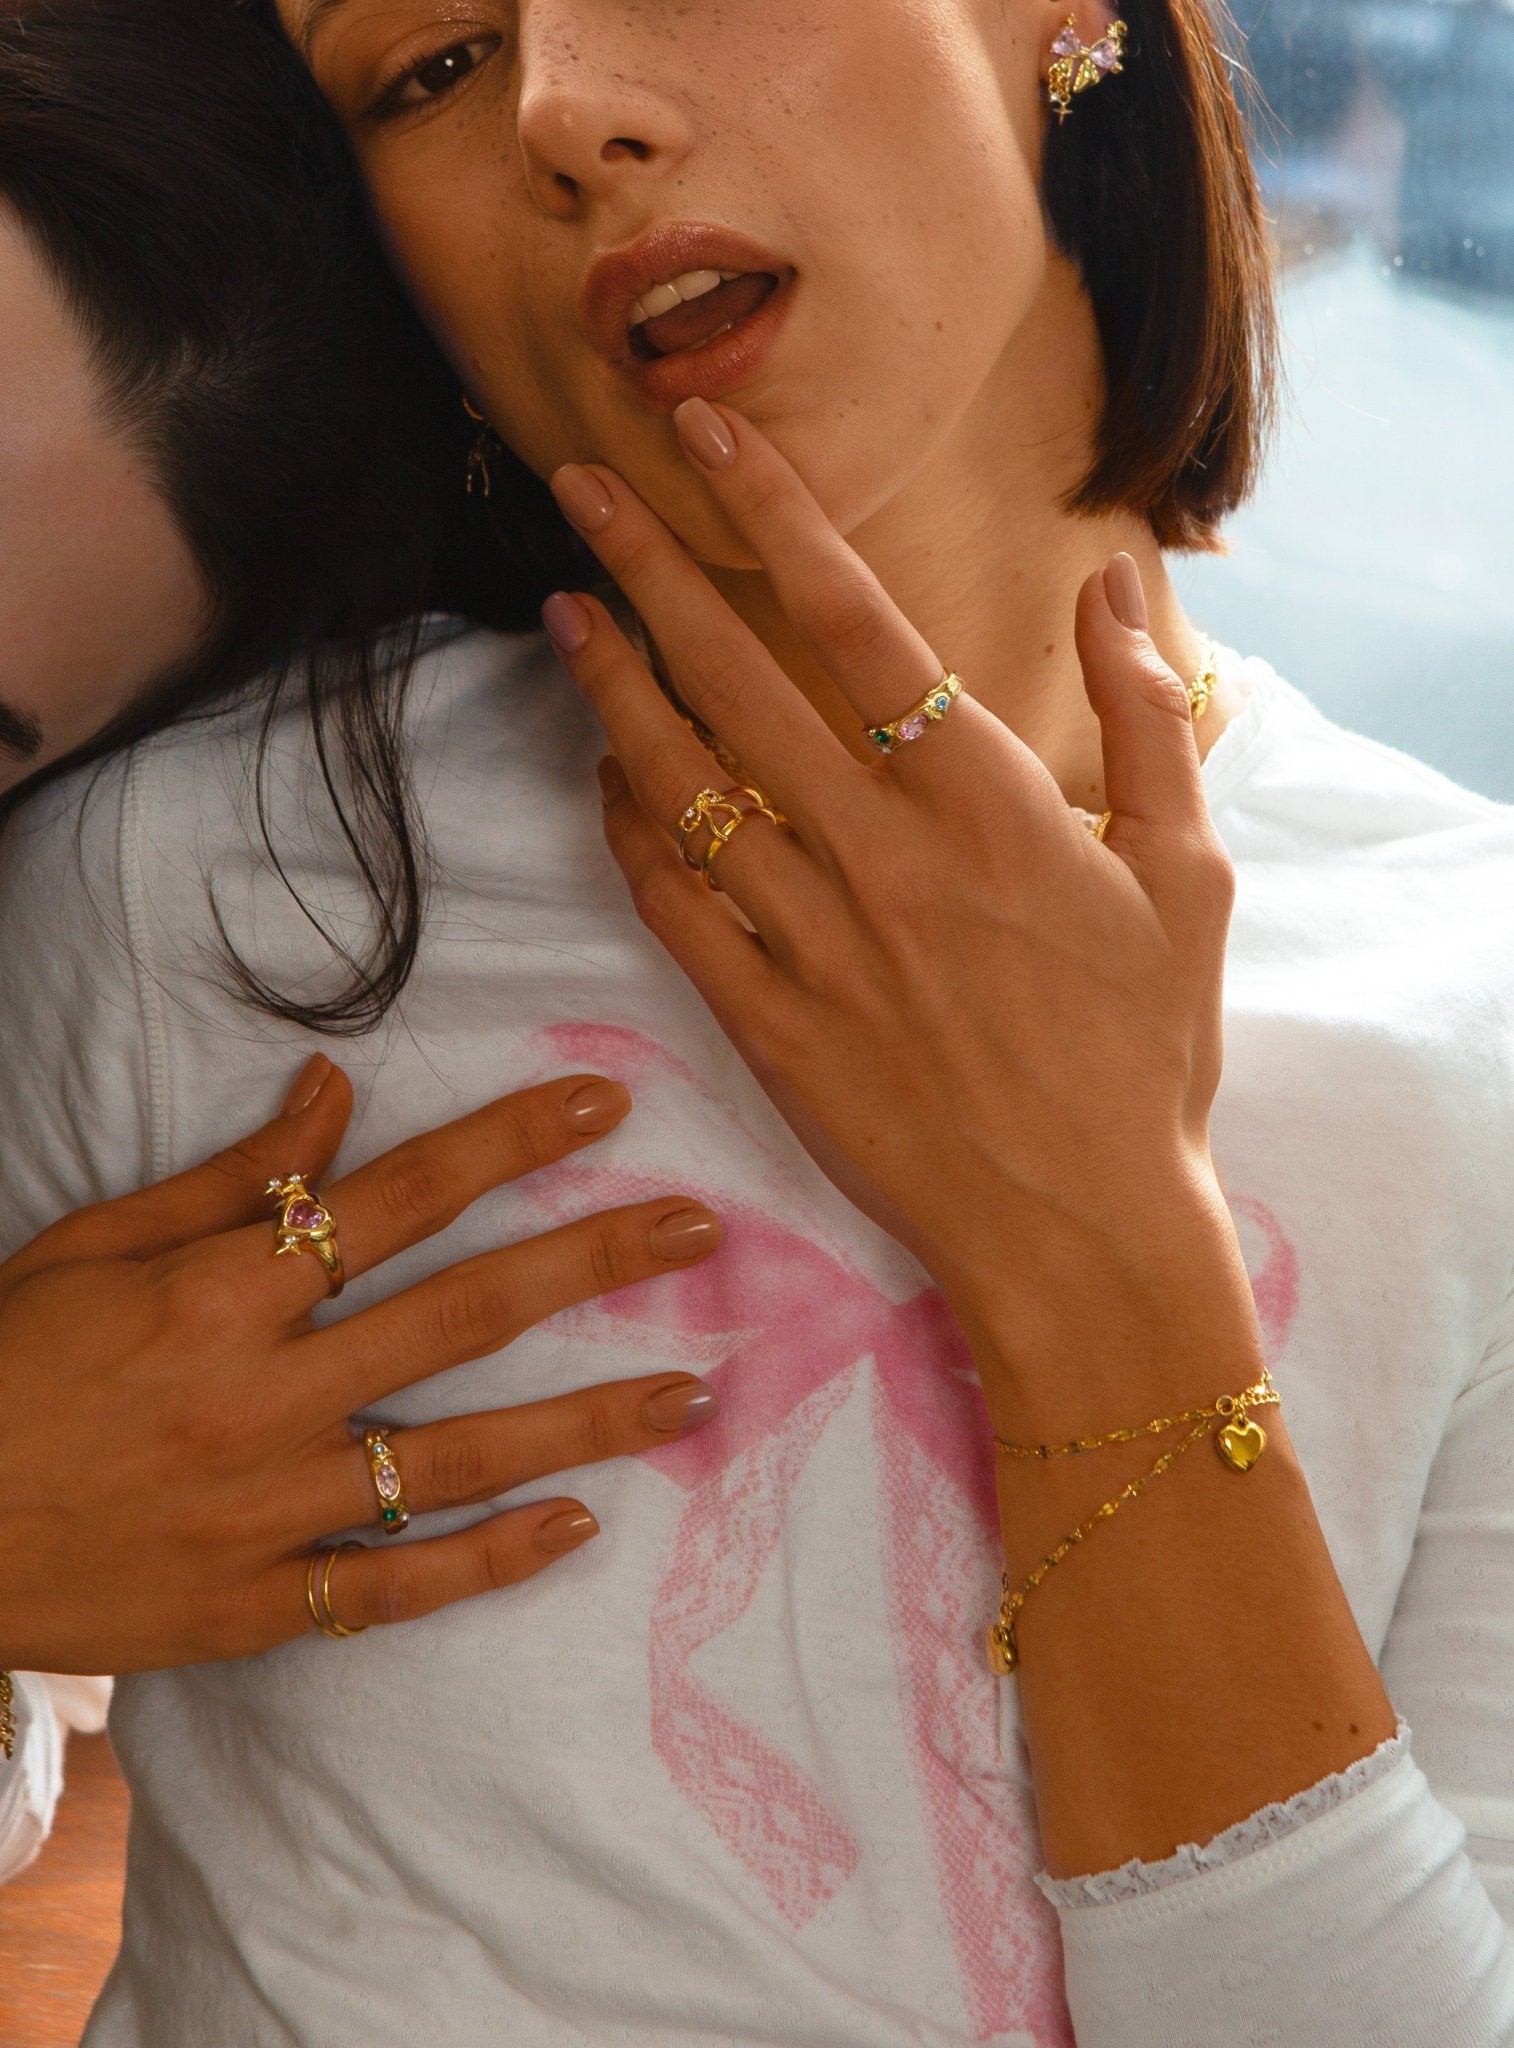 The Miffy Bague in Gold